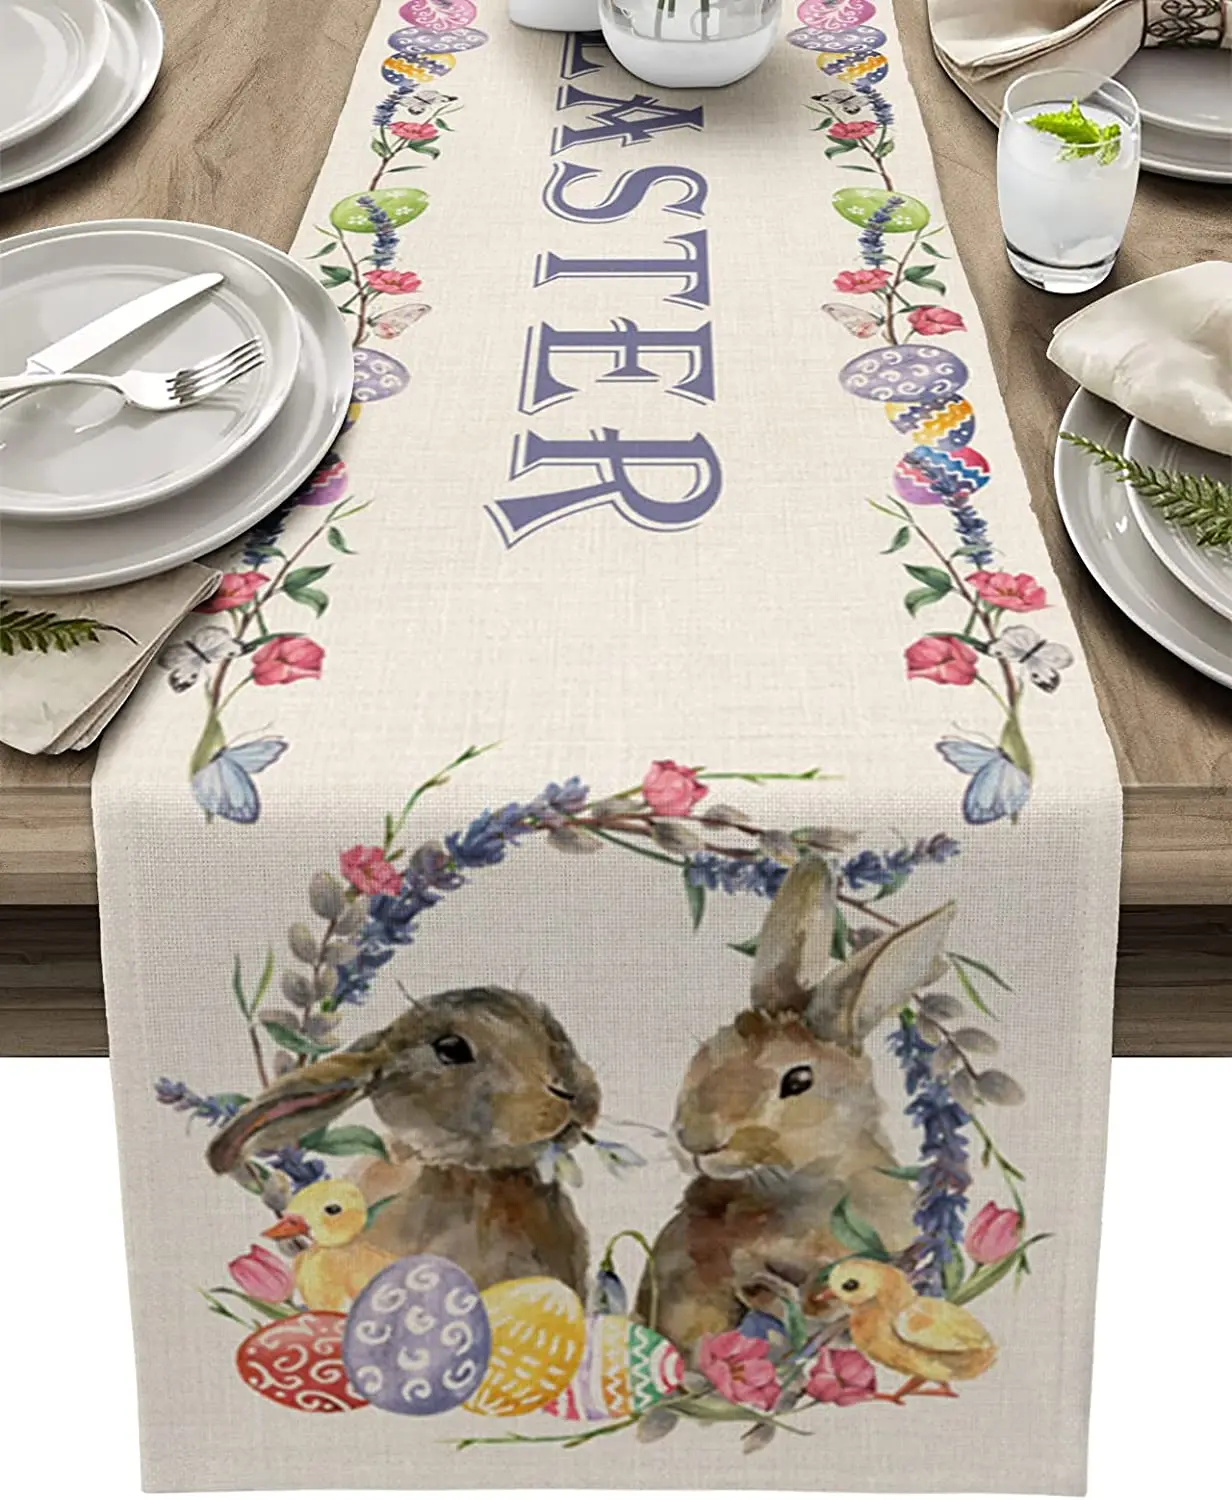 

Easter Watercolor Cute Plants Bunny Eggs Table Runner Table Flag Home Party Decorative Tablecloth Table Runners For Wedding